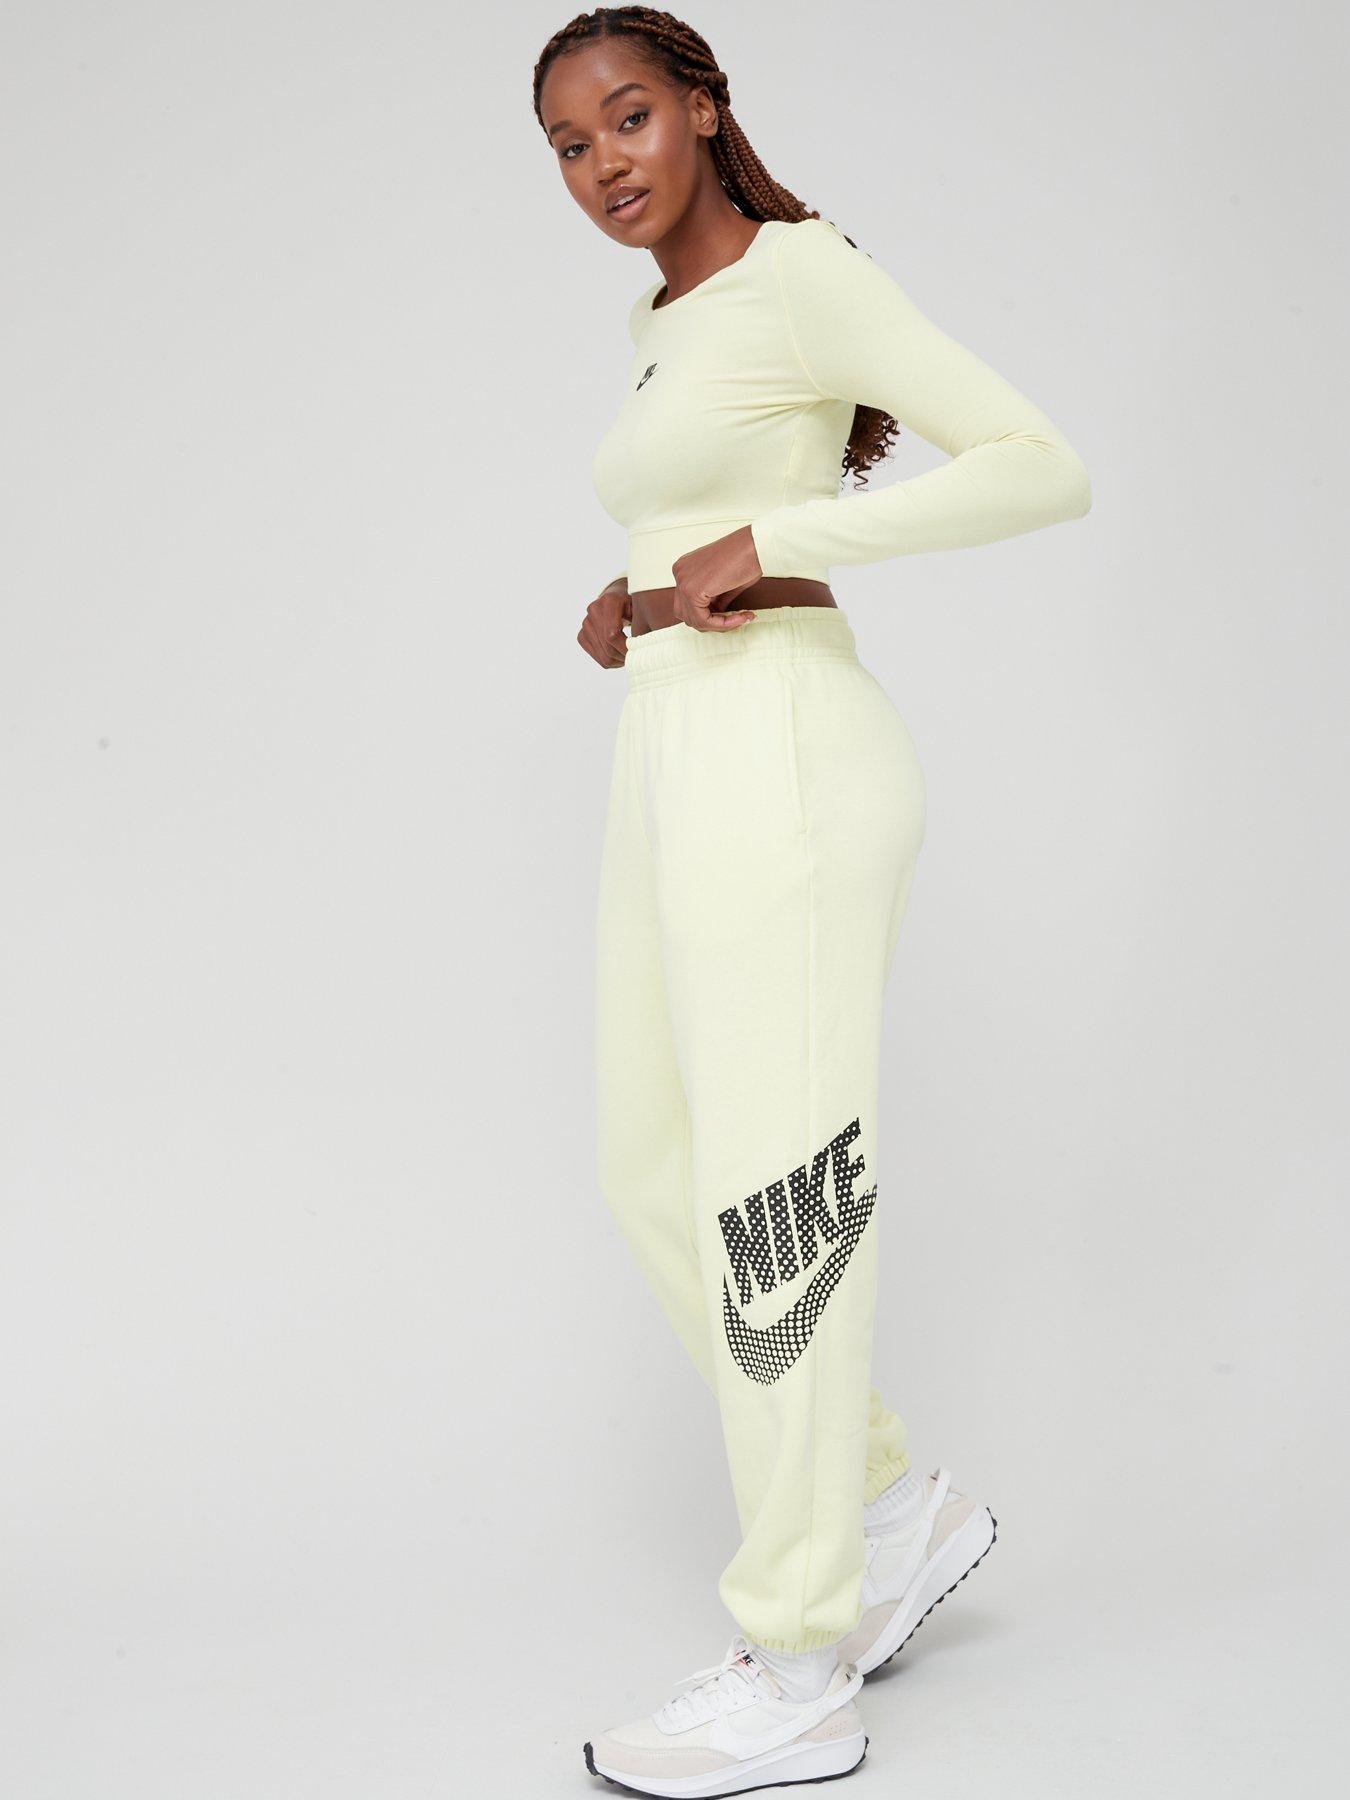 Jogging bottoms, Womens sports clothing, Sports & leisure